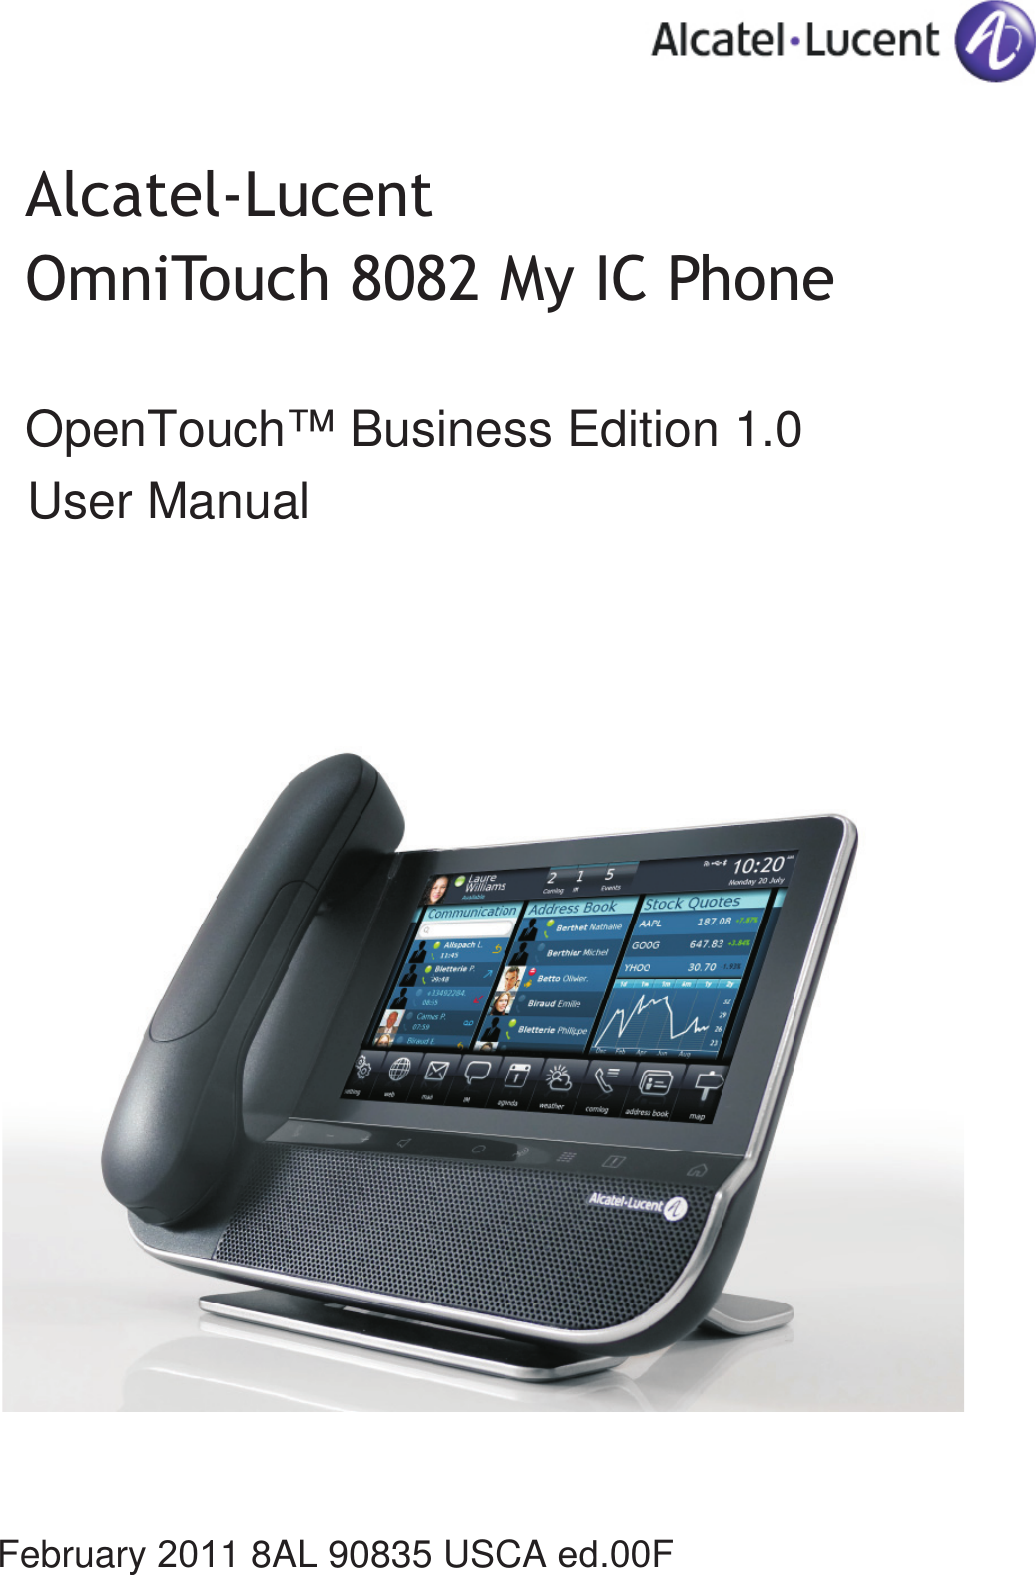 FirstAlcatel-LucentOmniTouch 8082 My IC Phone User ManualOpenTouch™ Business Edition 1.0February 2011 8AL 90835 USCA ed.00F